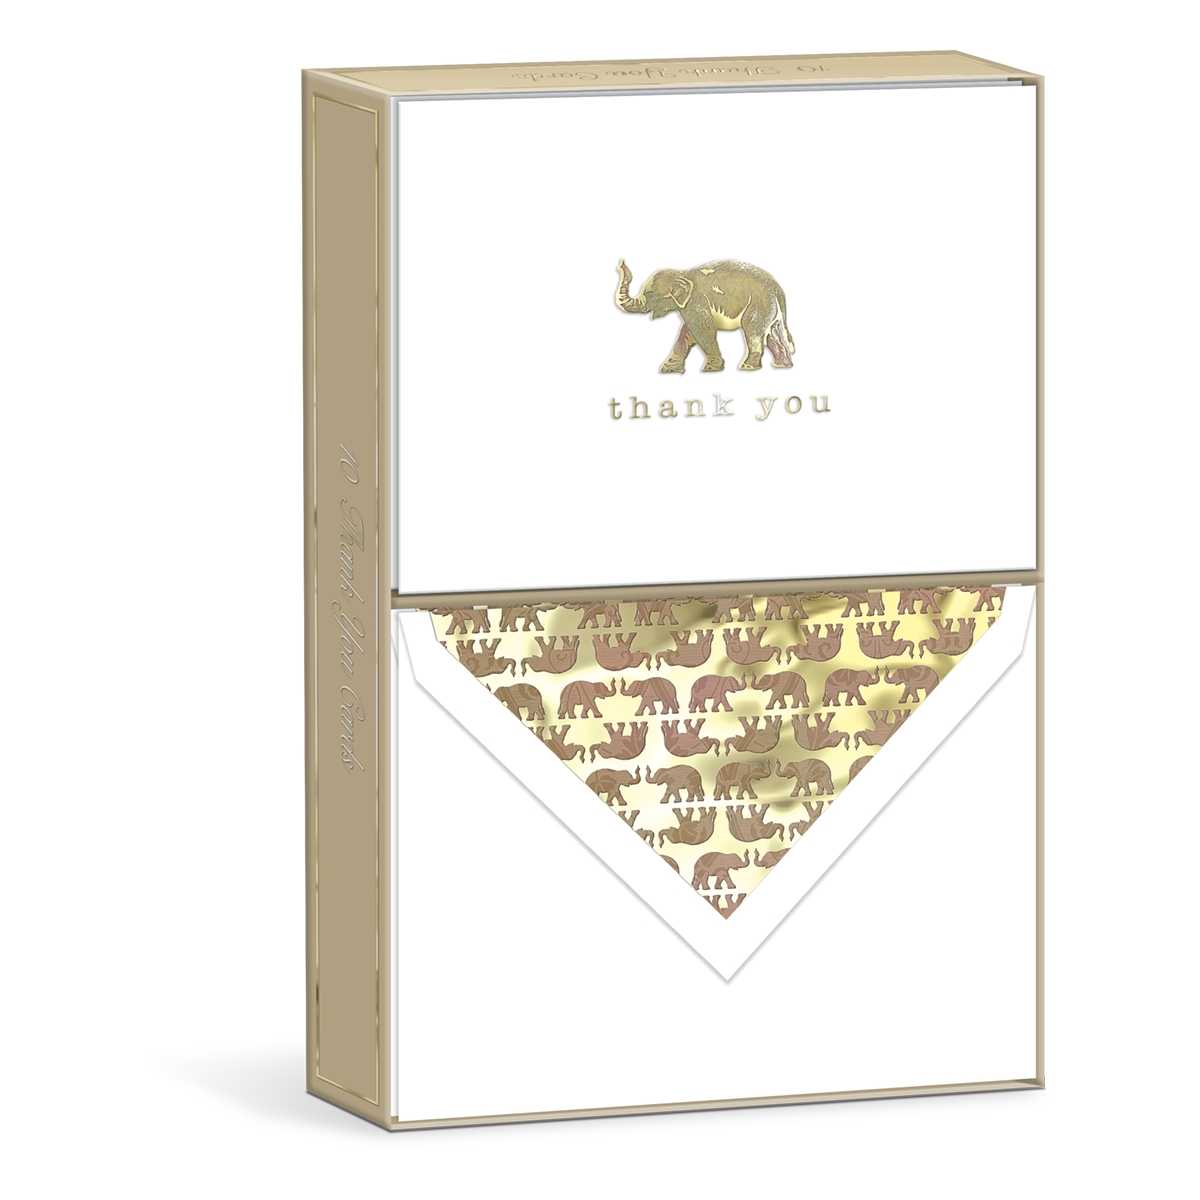 Elephant Thank You Cards Product